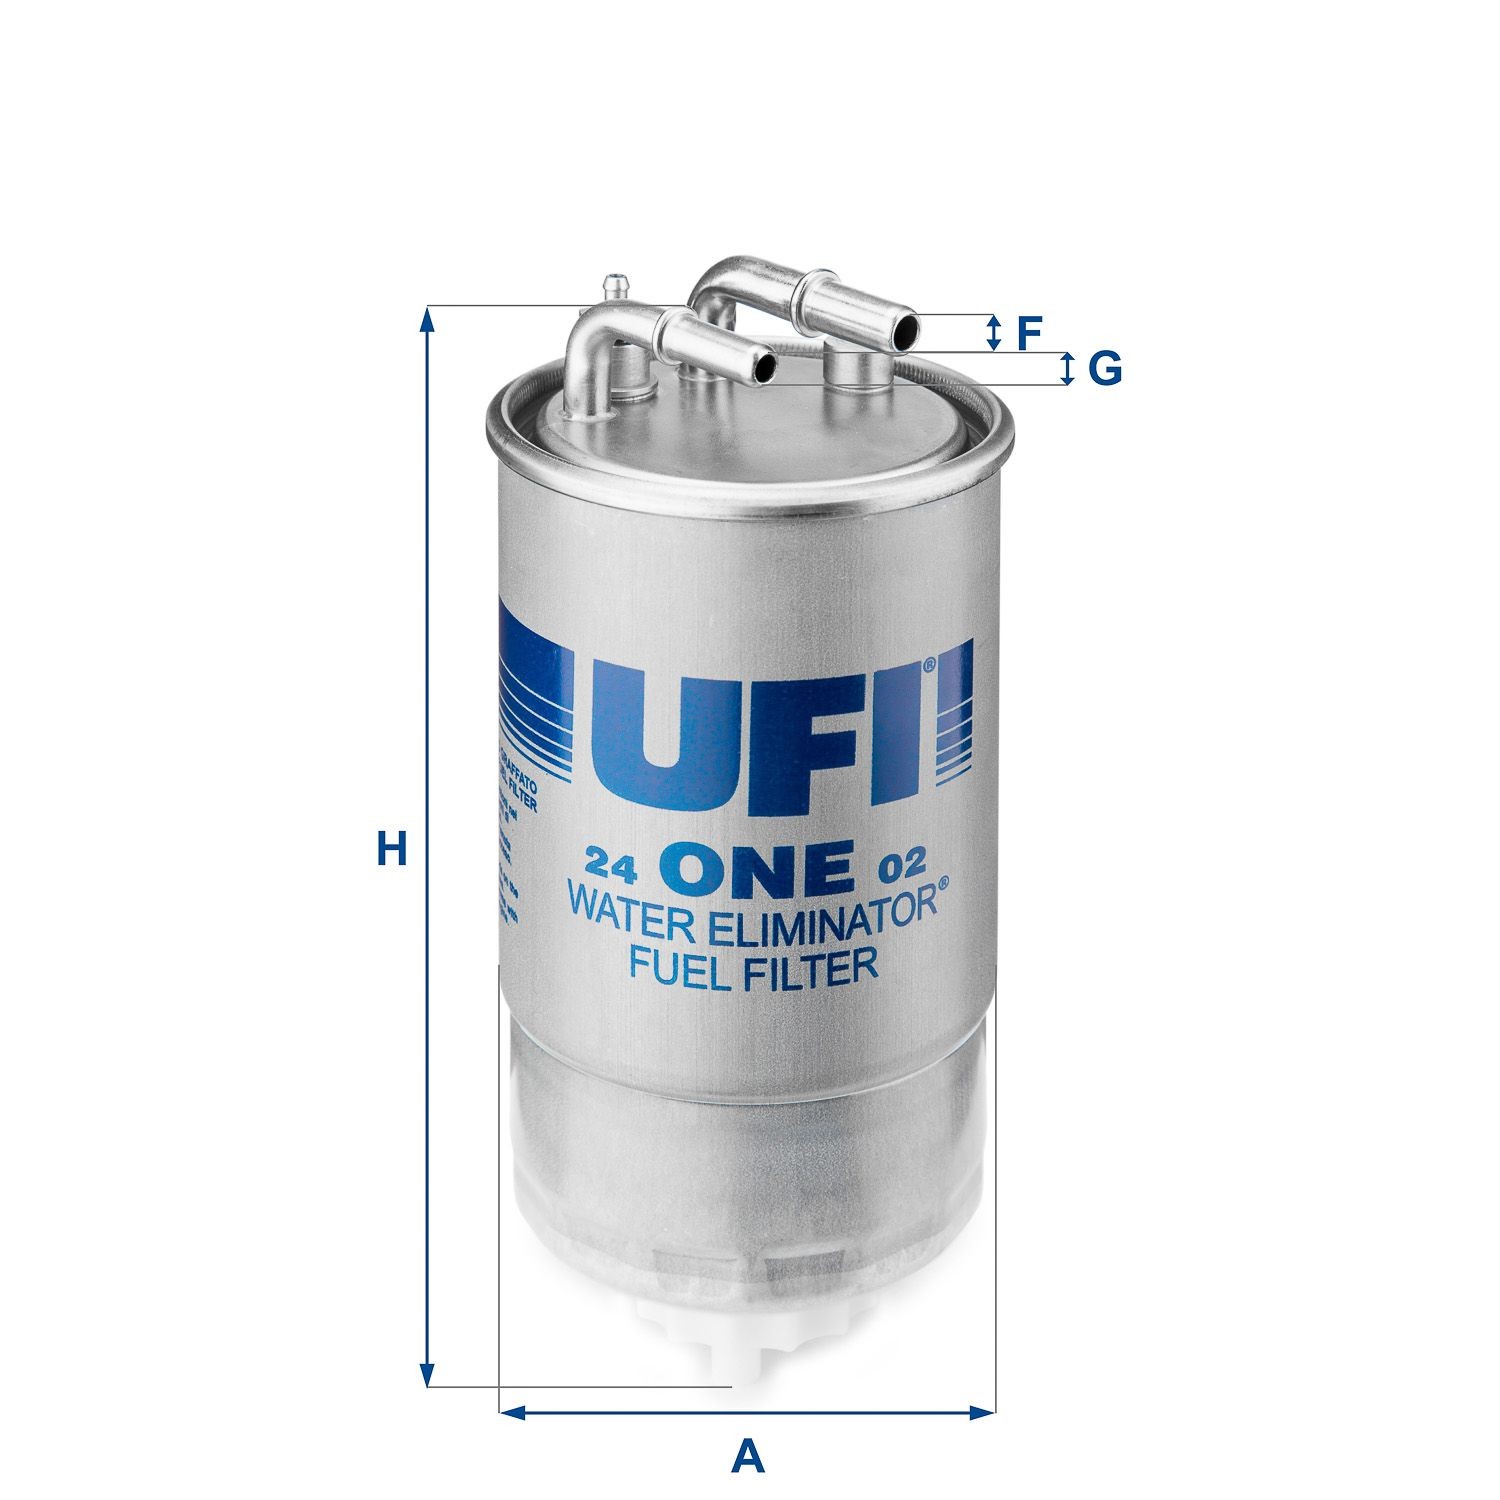 UFI 24.ONE.02 Fuel filter 13230386